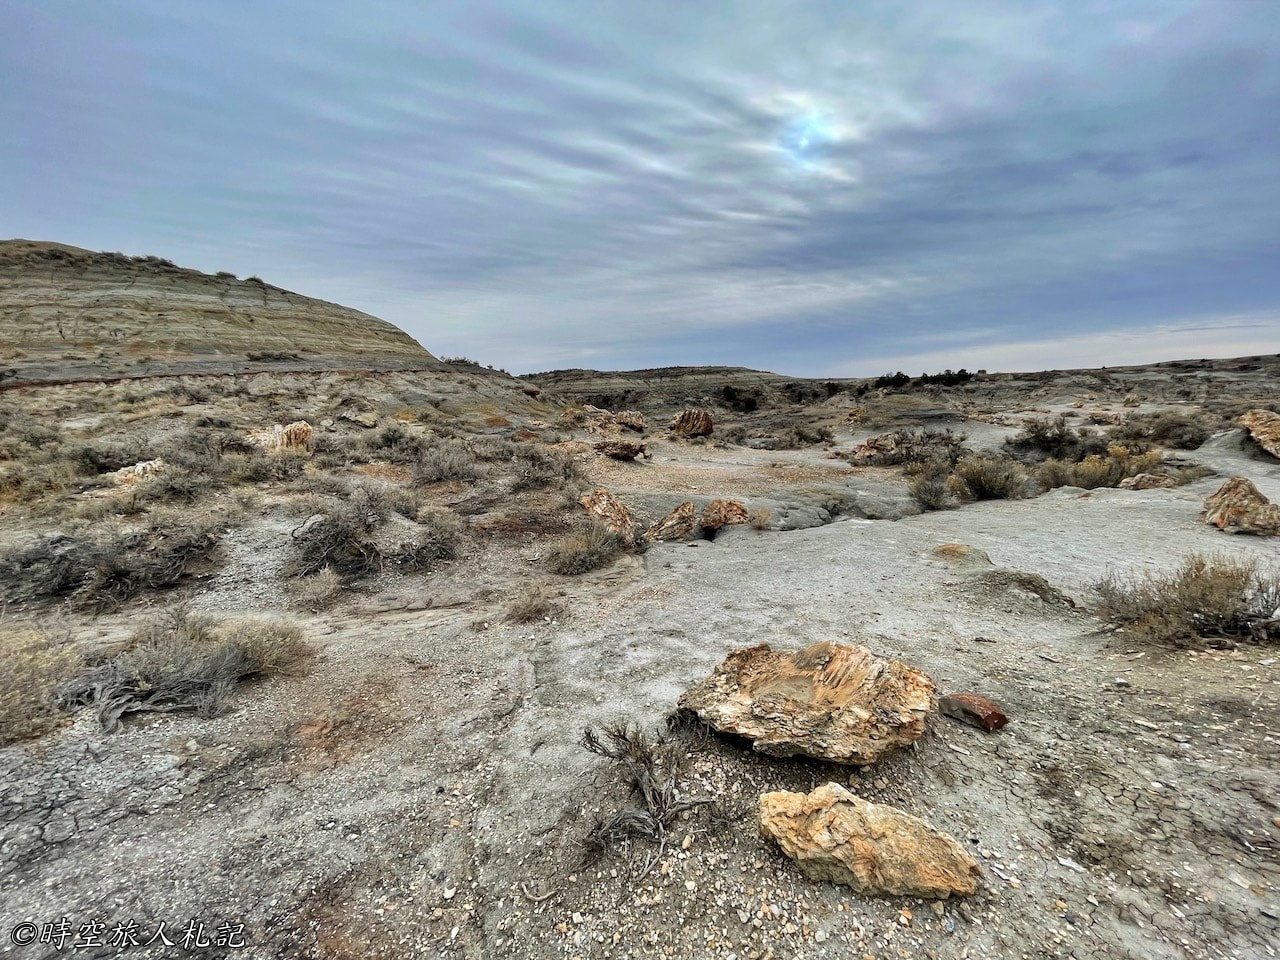 Theodore roosevelt national park,Petrified forest,羅斯福國家公園,石化林 25